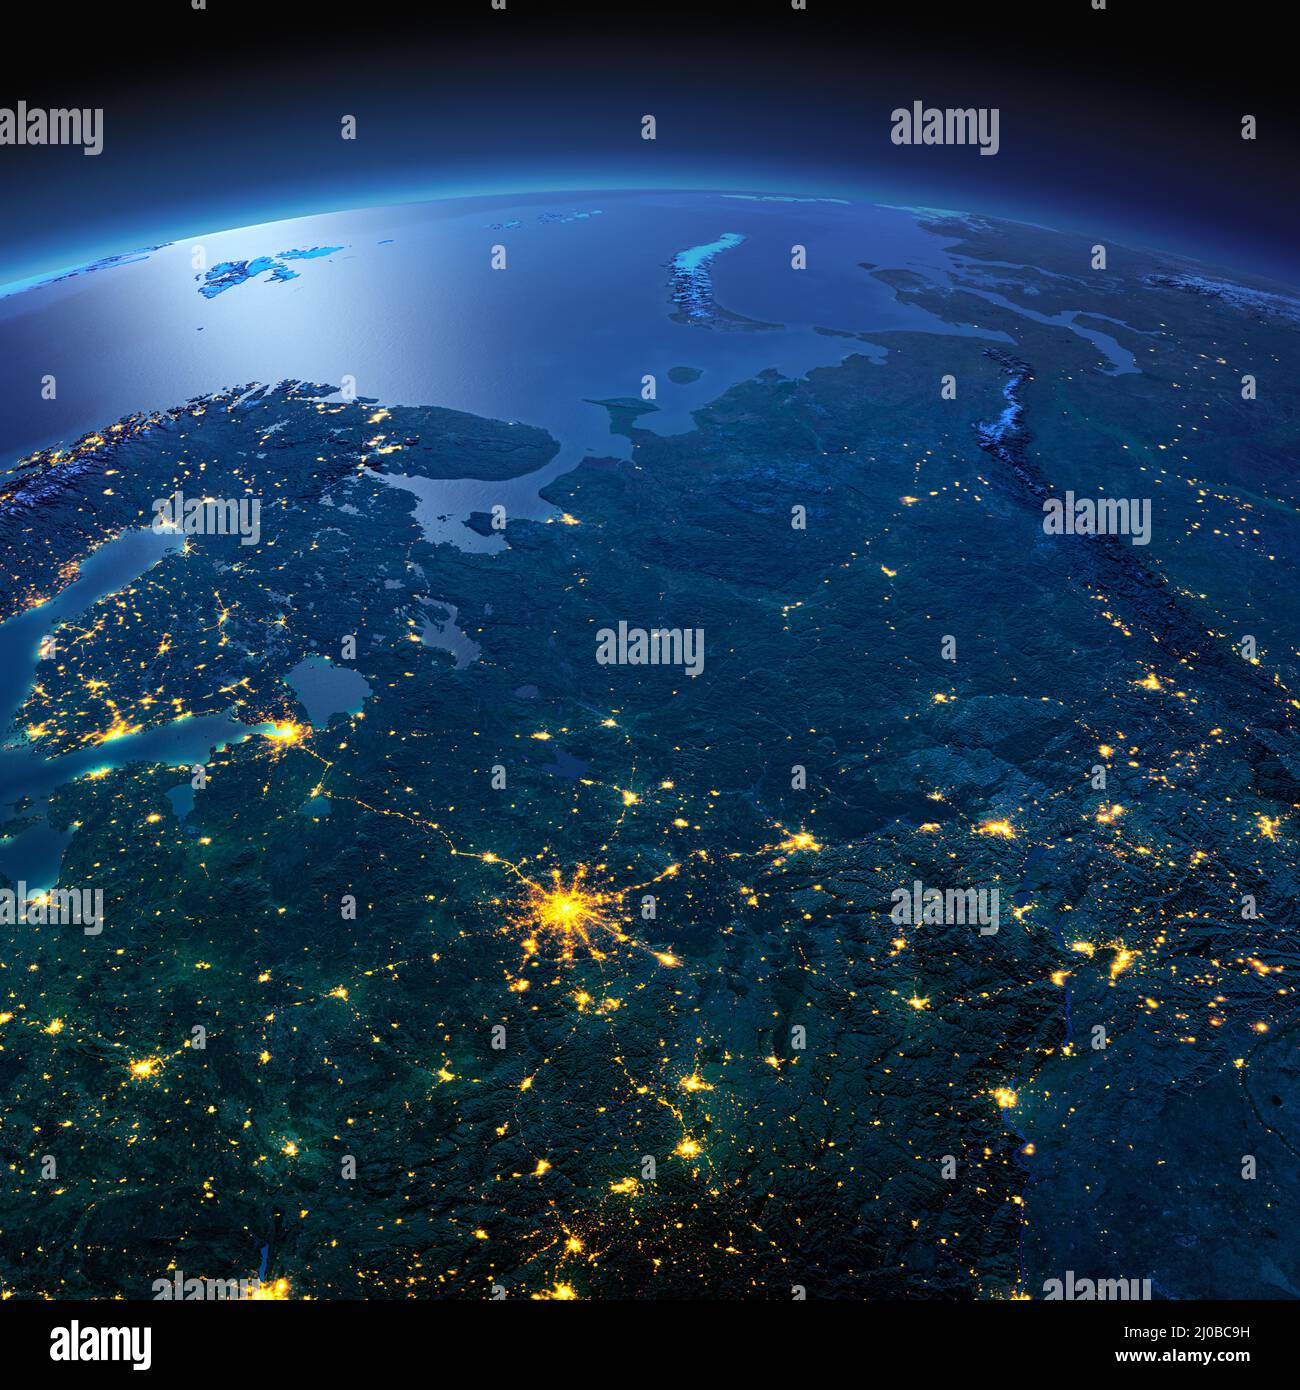 Detailed Earth. European part of Russia on a moonlit night Stock Photo